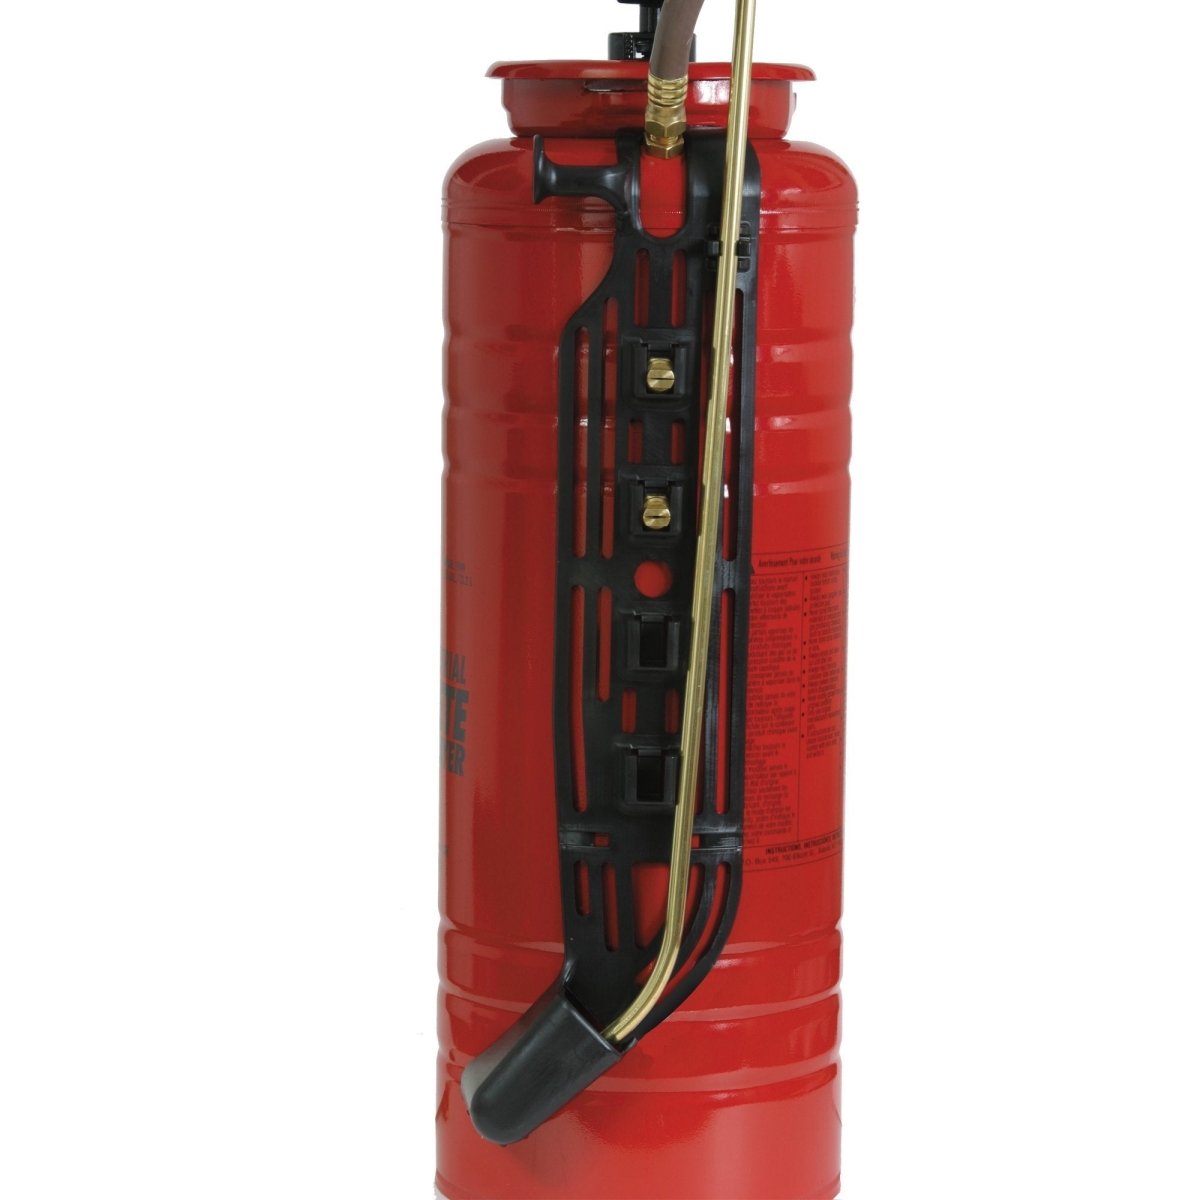 13.2 Litre - Chapin 1949 Industrial Sprayer with Chemical Resistant FKM Seal - Premium Paints